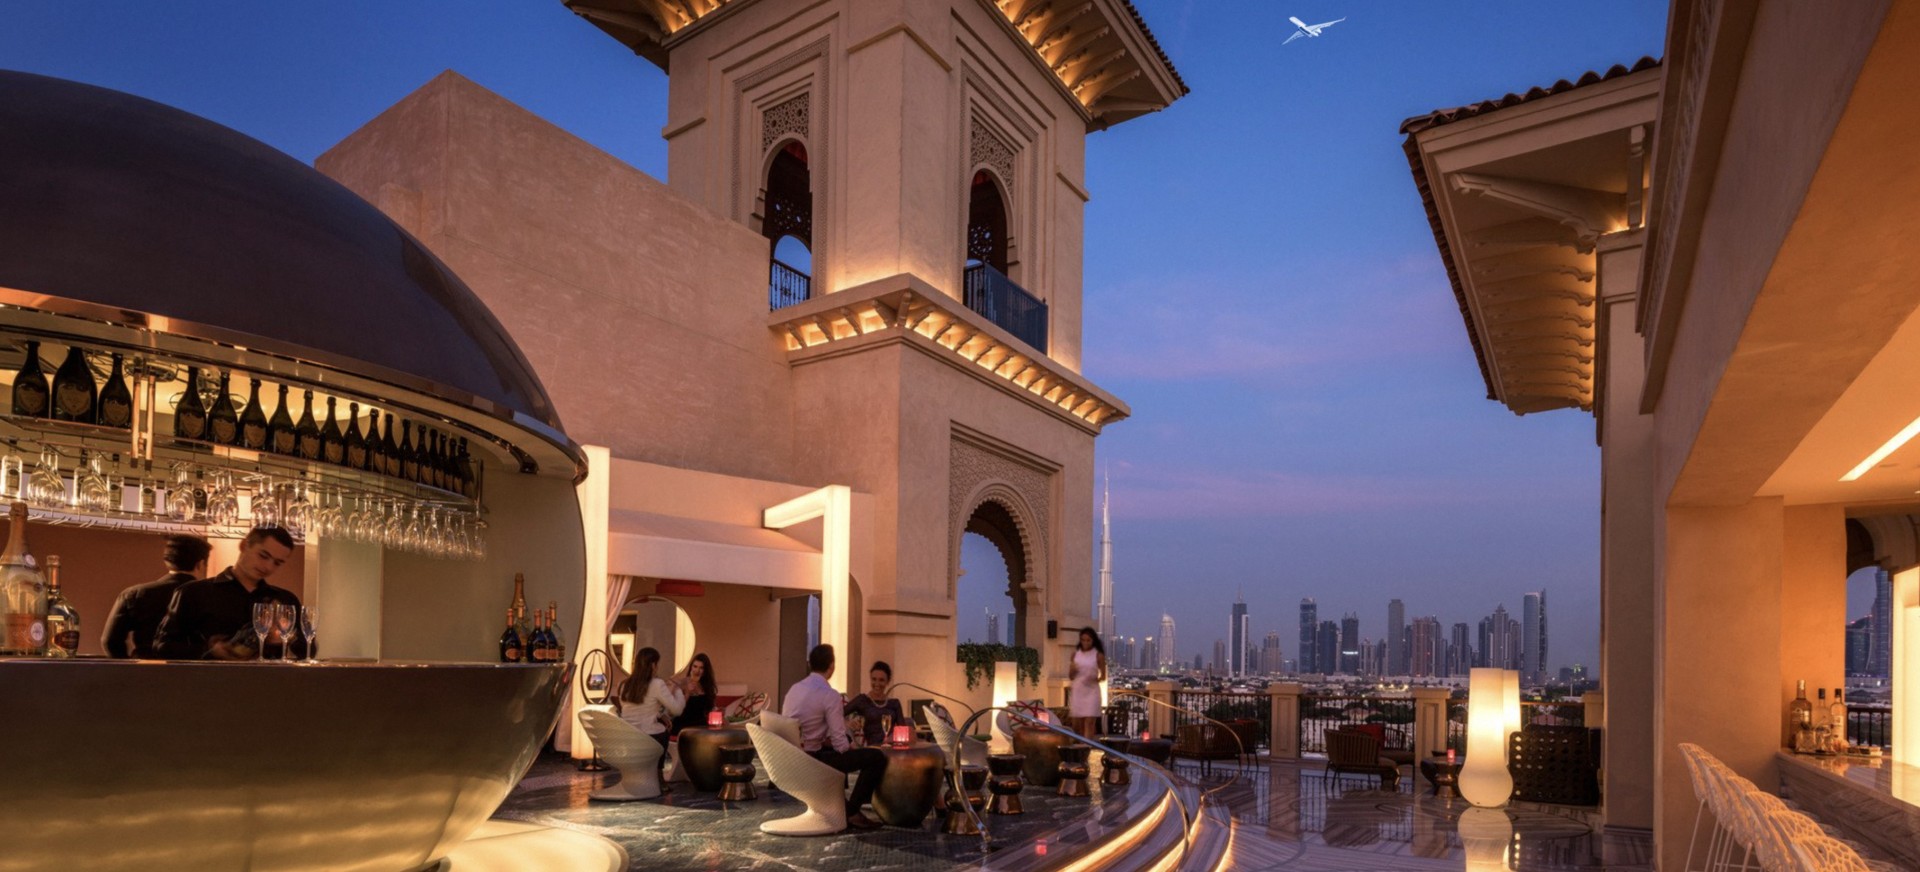 Rooftop bar in Dubai at night with plane flying in sky